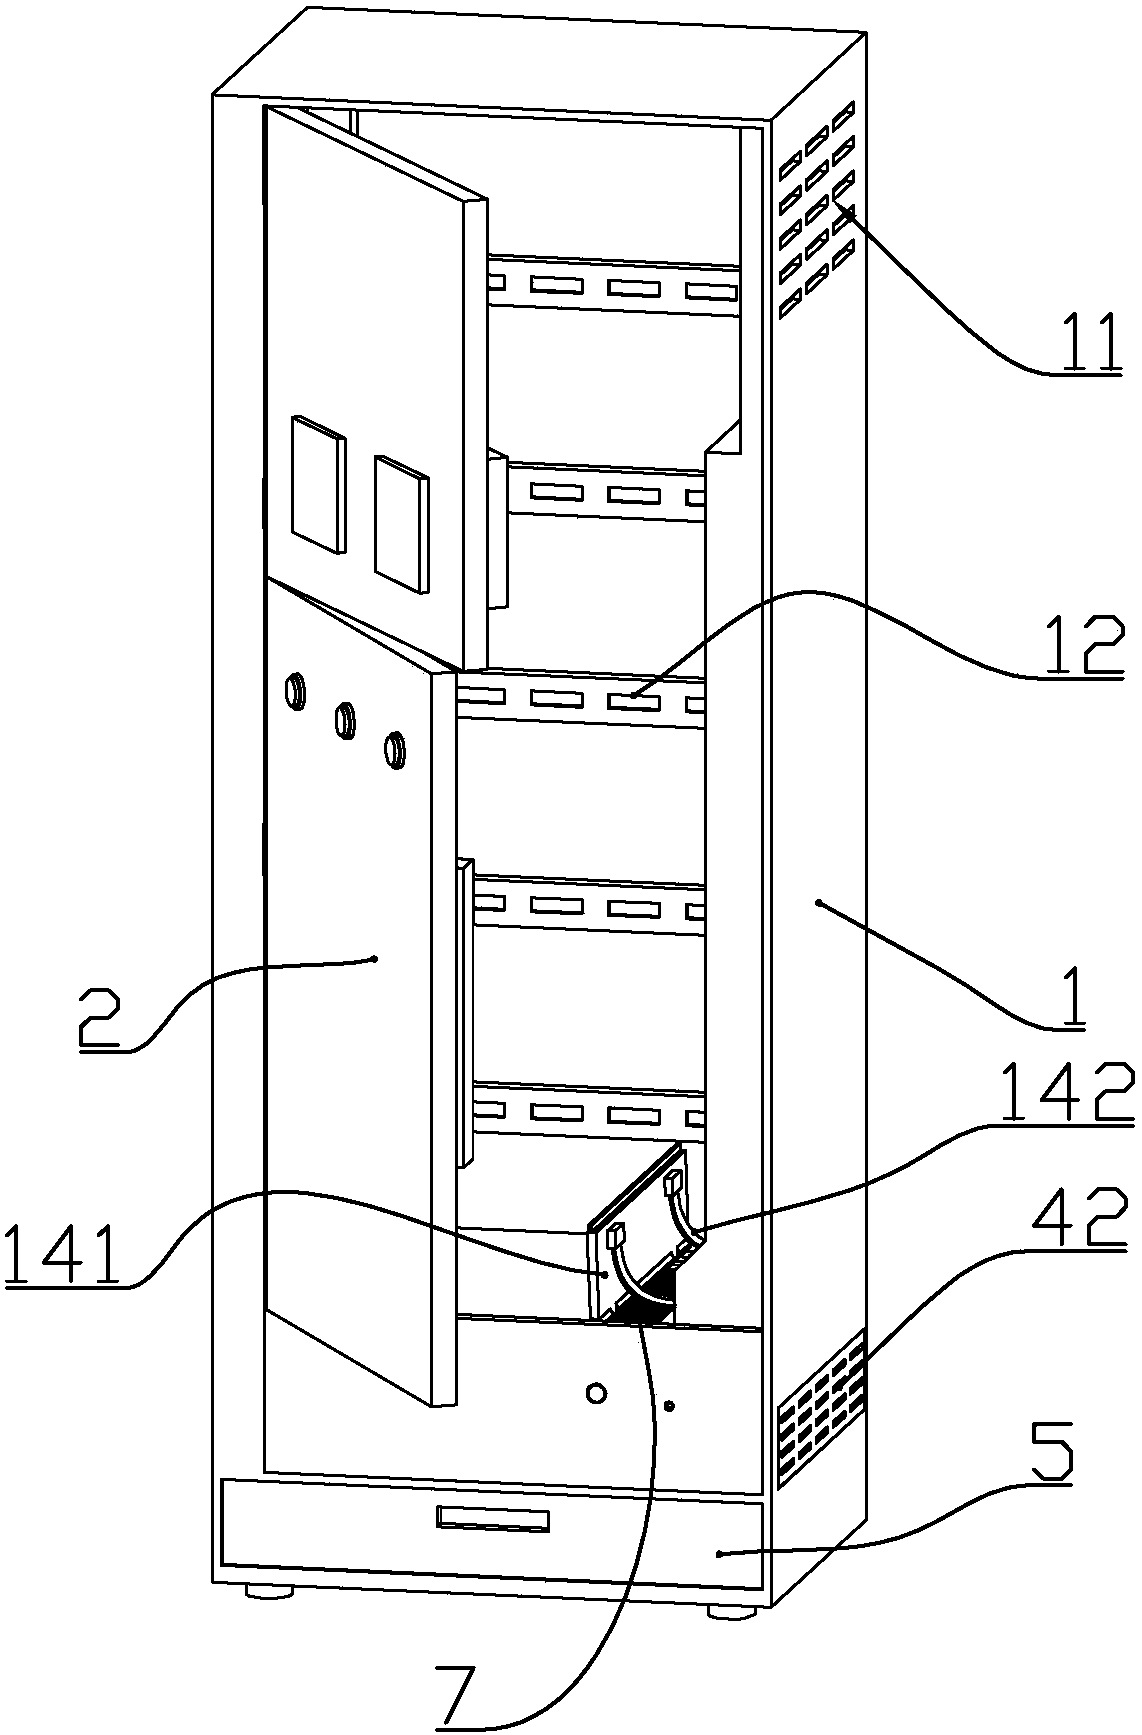 A power distribution cabinet